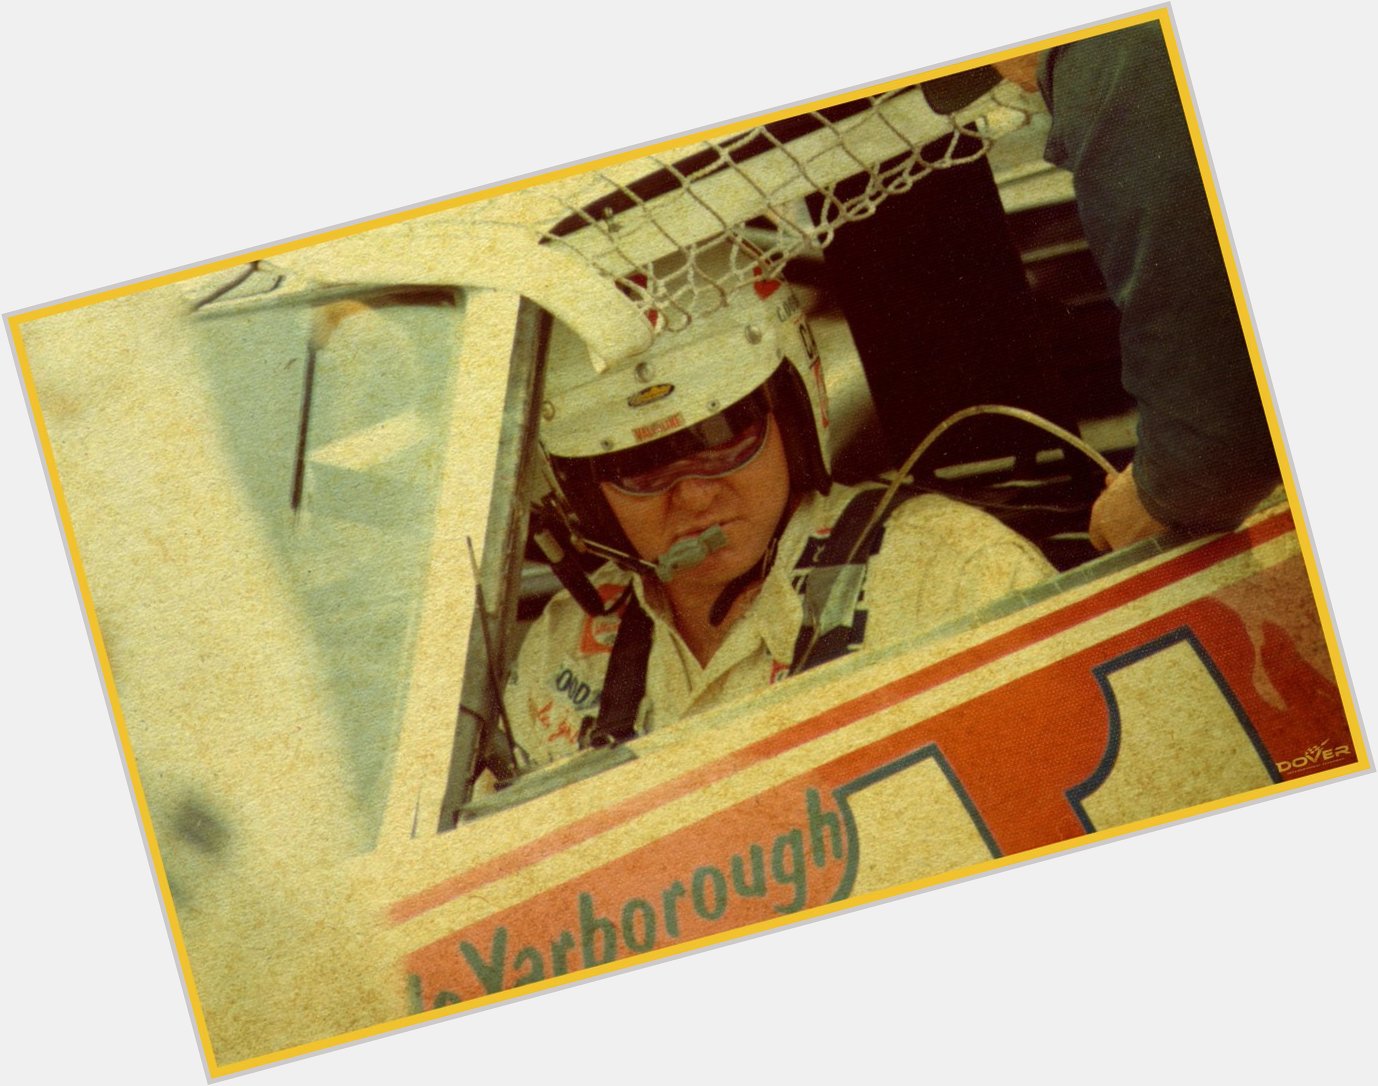 Happy Birthday to 3-time winner Cale Yarborough, who turns 78 today! 